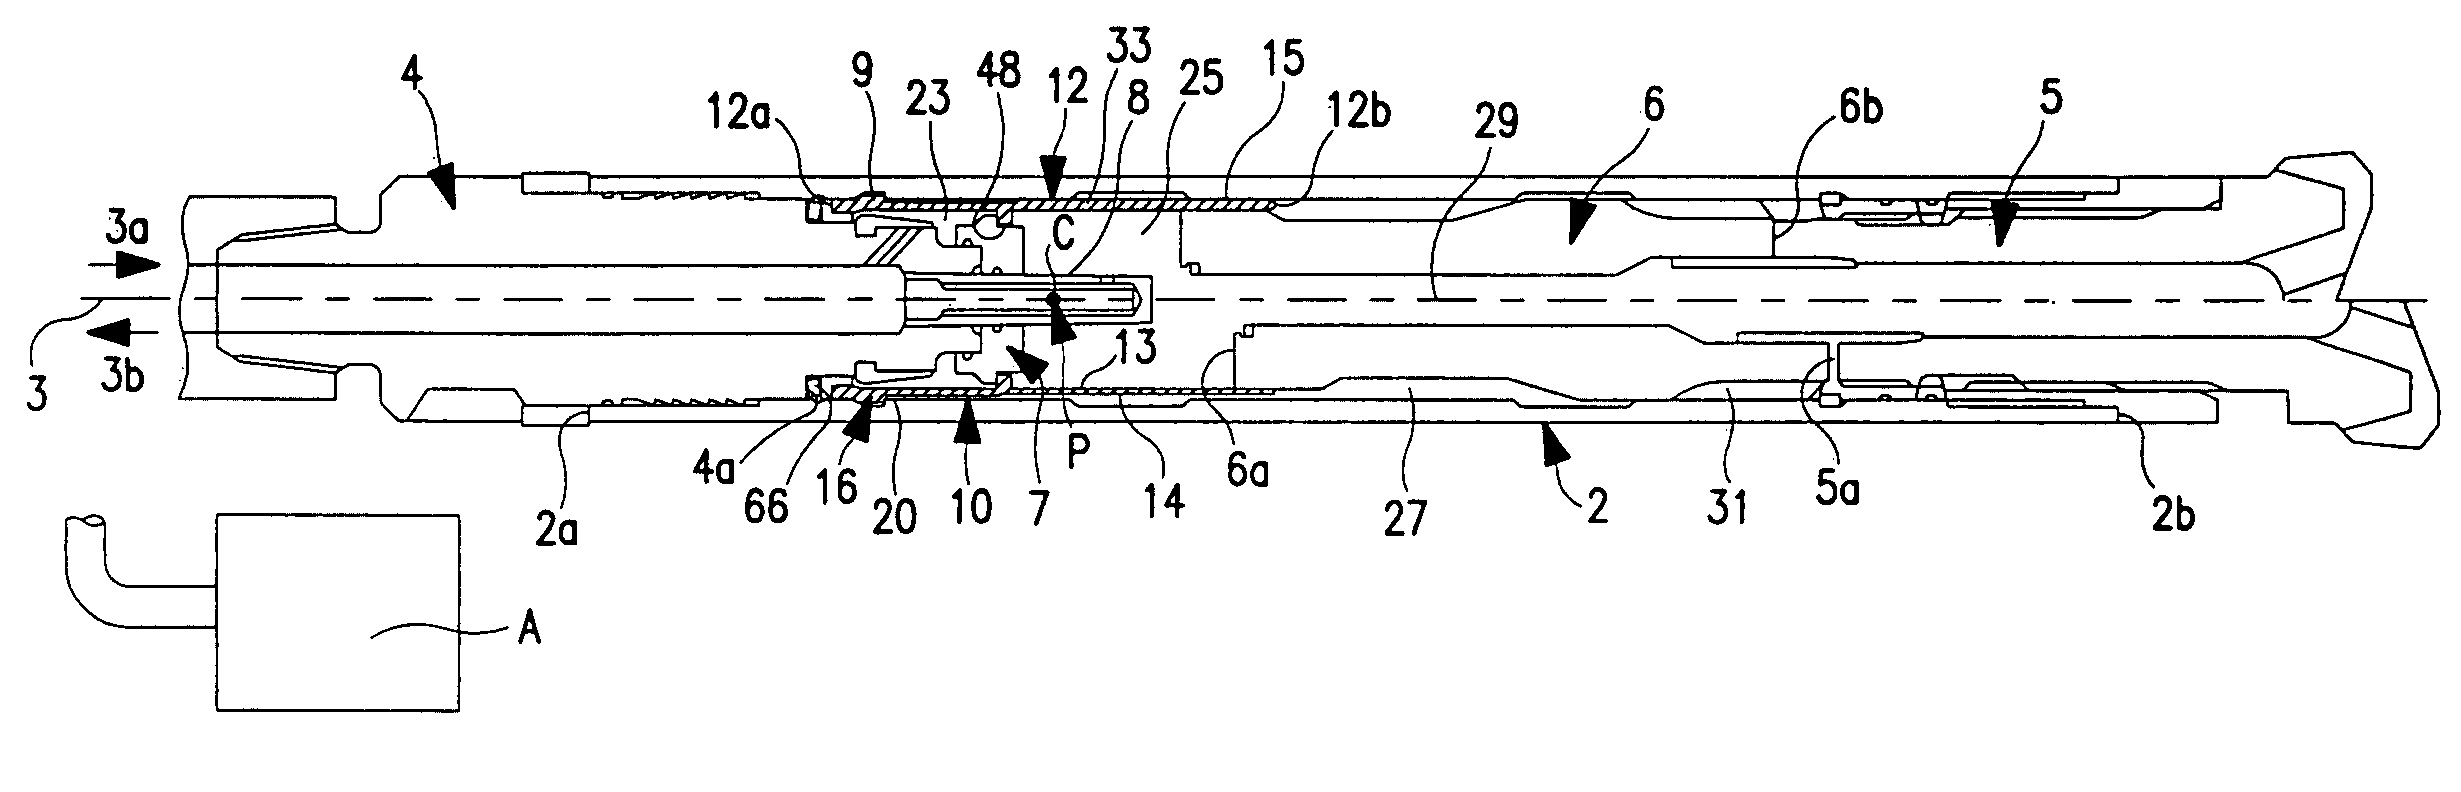 Fluid distributor device for down-hole-drills